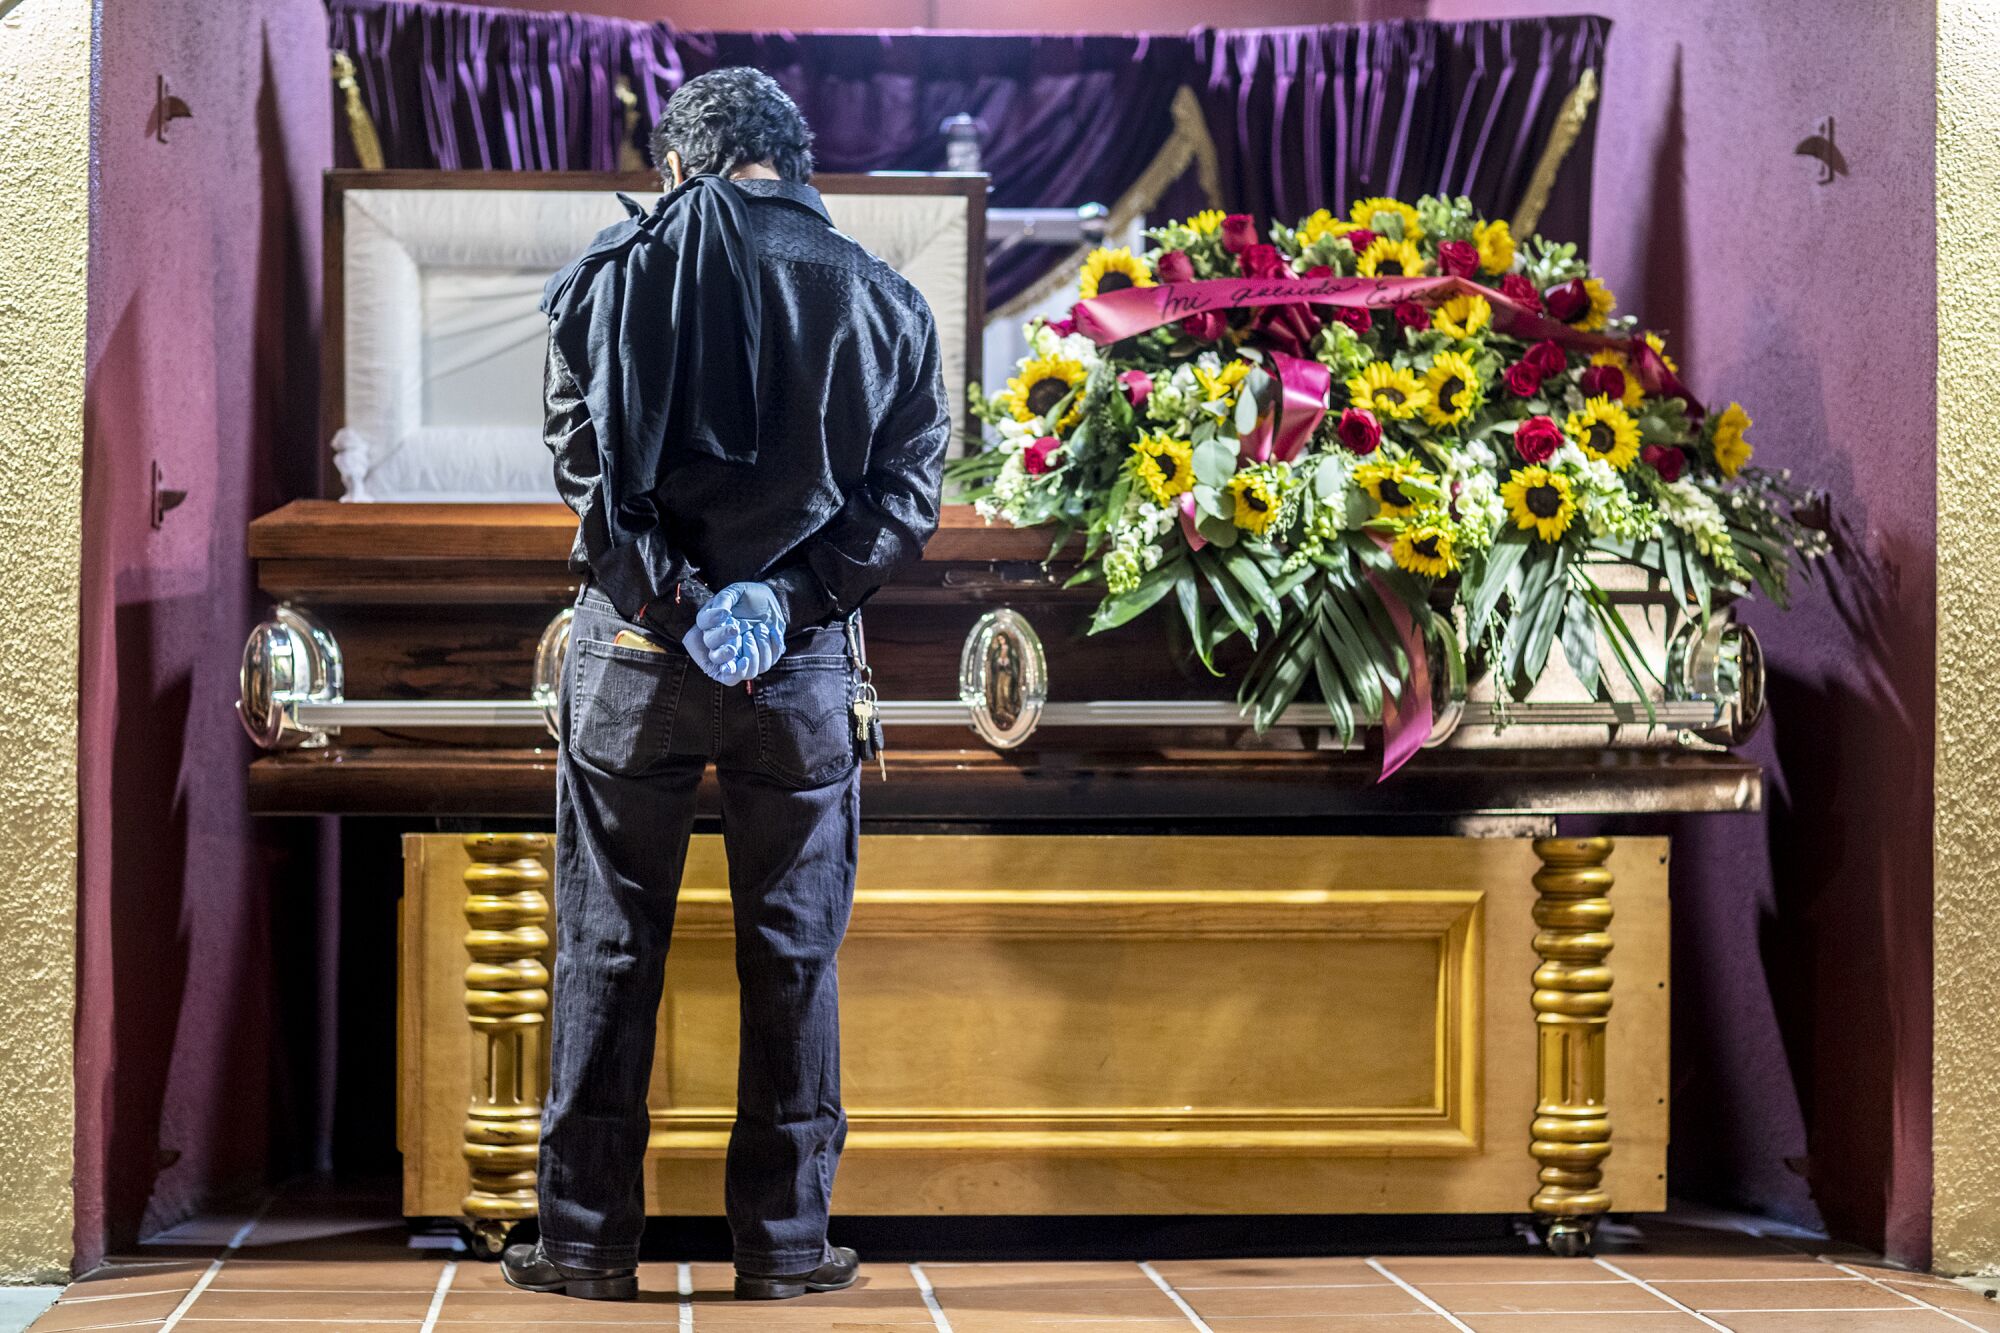 A man stands with hands clasped behind his back in front of a casket covered in sunflowers.